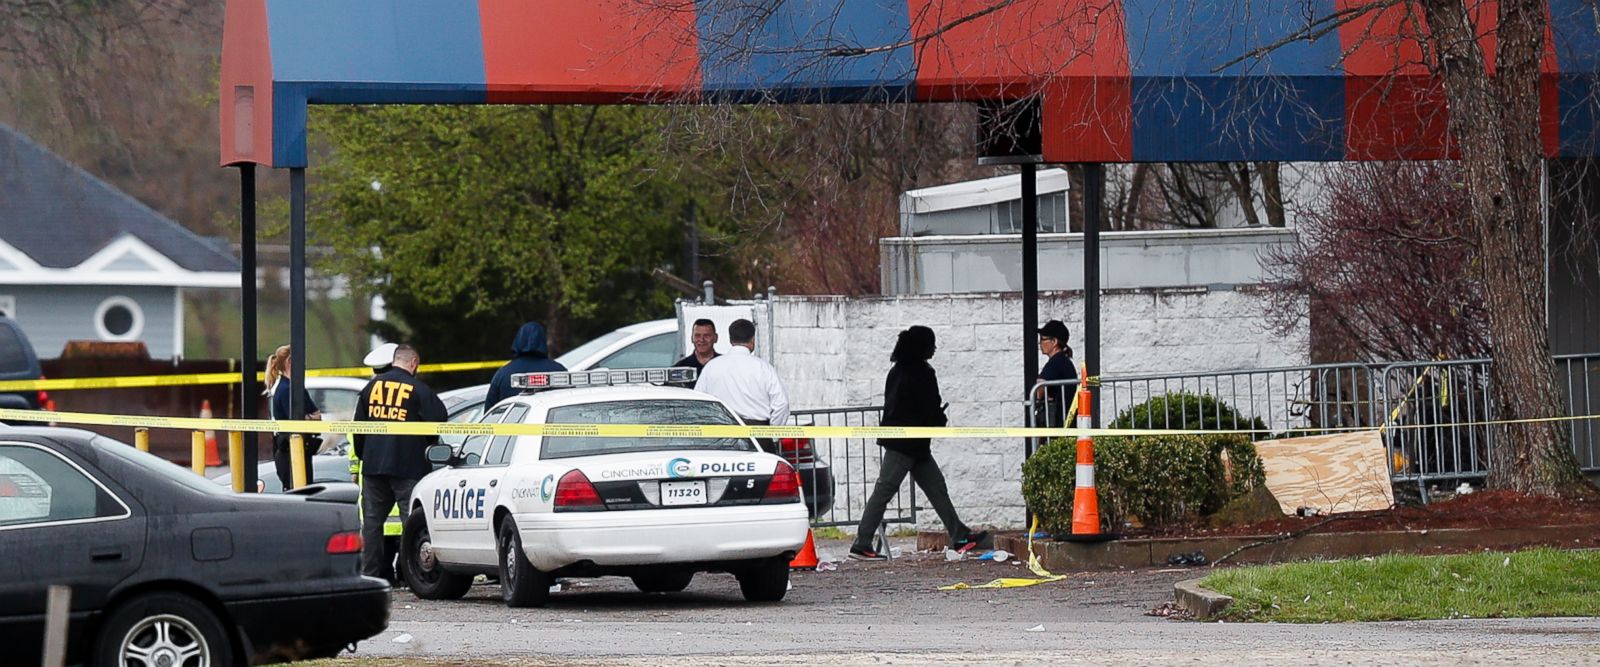 Members of the ATF and local police work at a crime scene at the Cameo club after a fatal shooting, Sunday, March 26, 2017, in Cincinnati. (AP Photo/John Minchillo)